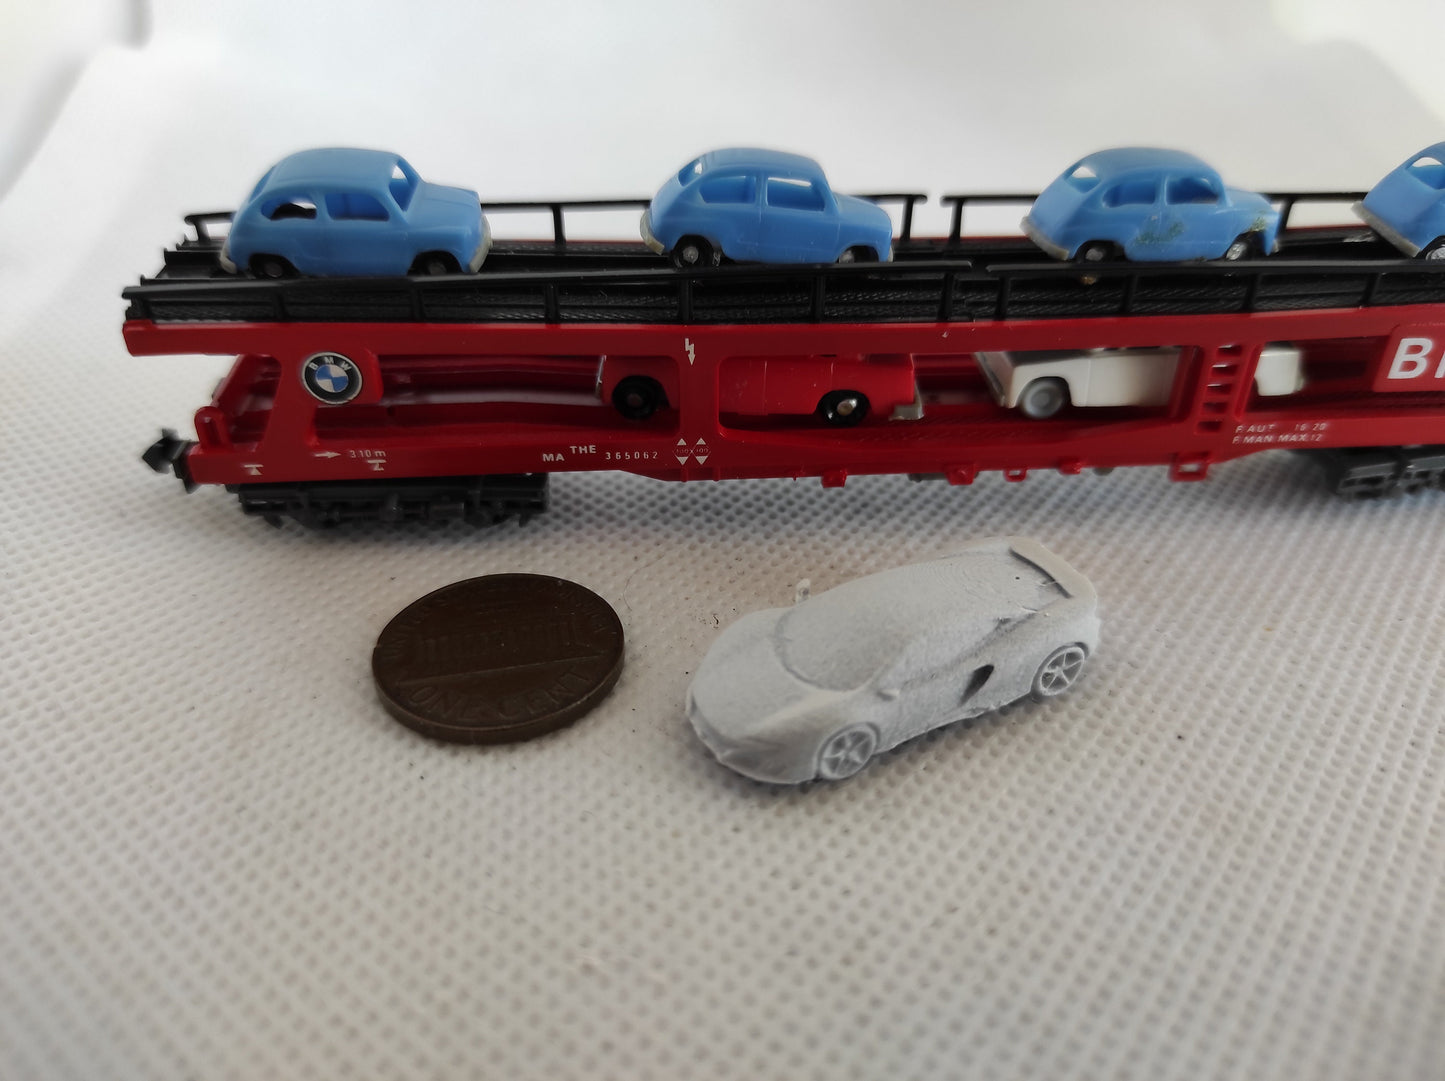 Assortment CARS, N-GAUGE, modern, vintage, military, F1. Suitable for N-scale railways and dioramas, gifts, dollhouse, cakes DiY or painted.